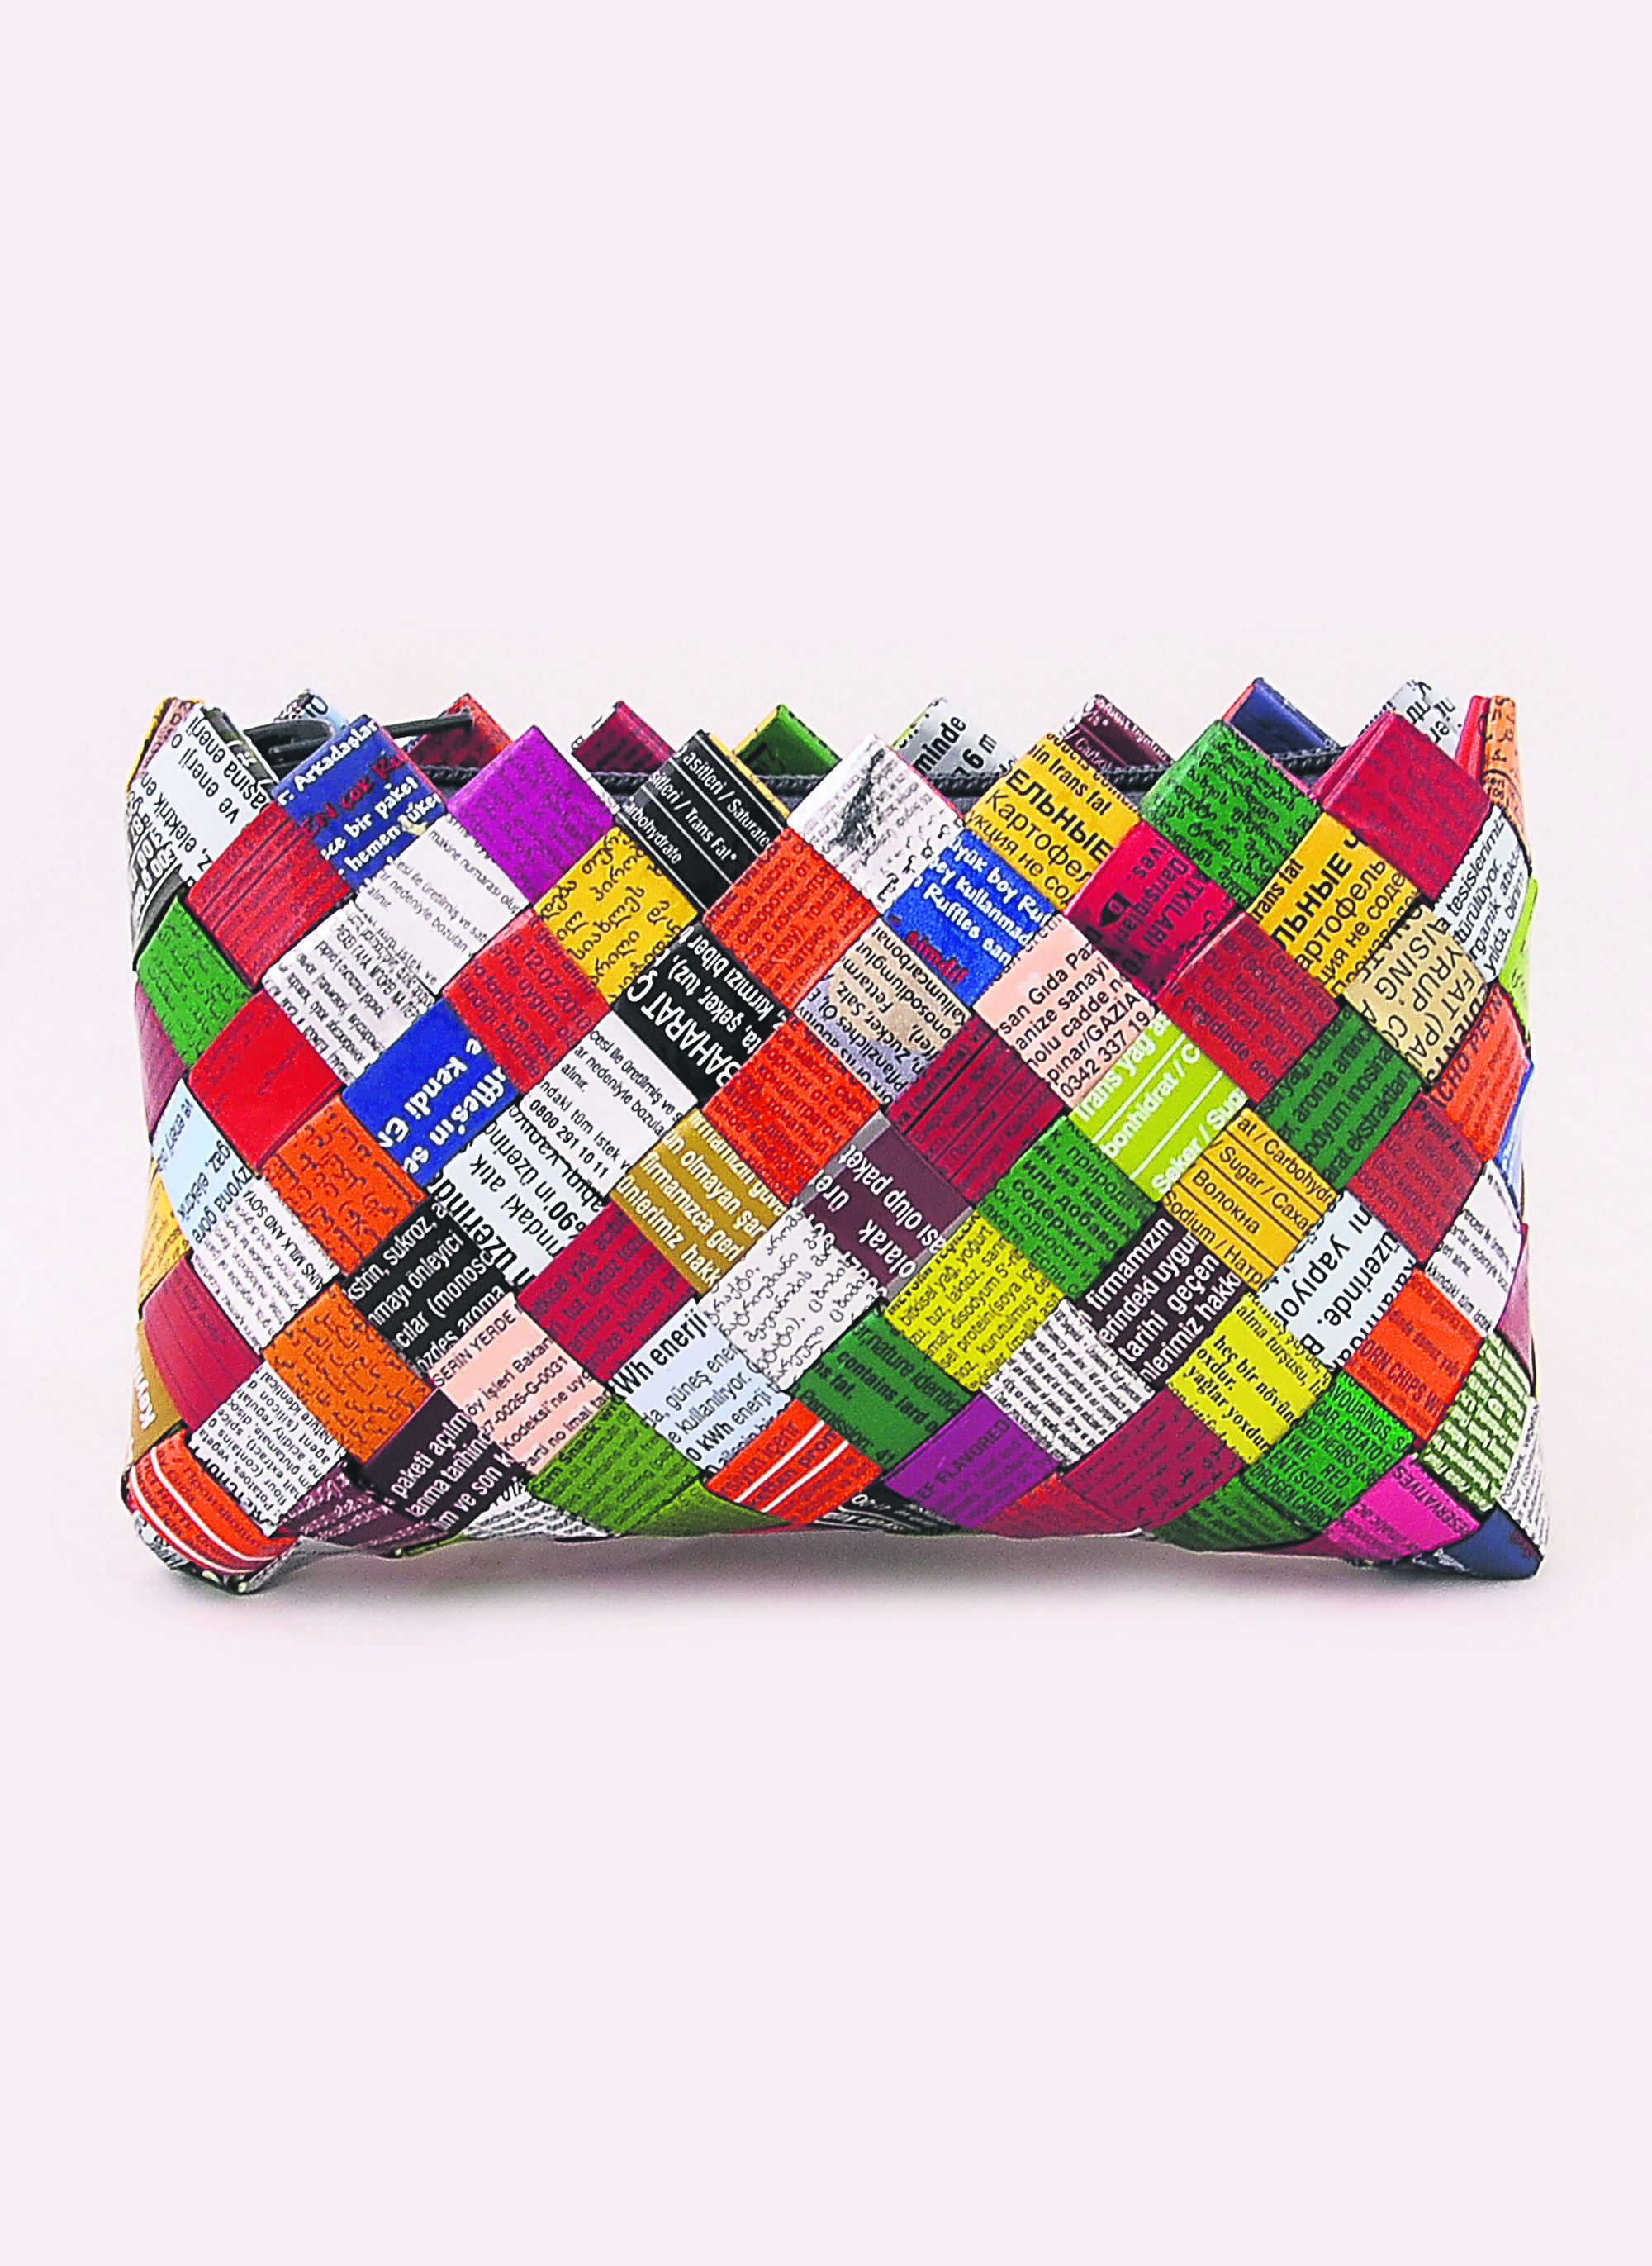 A handbag designed by the project